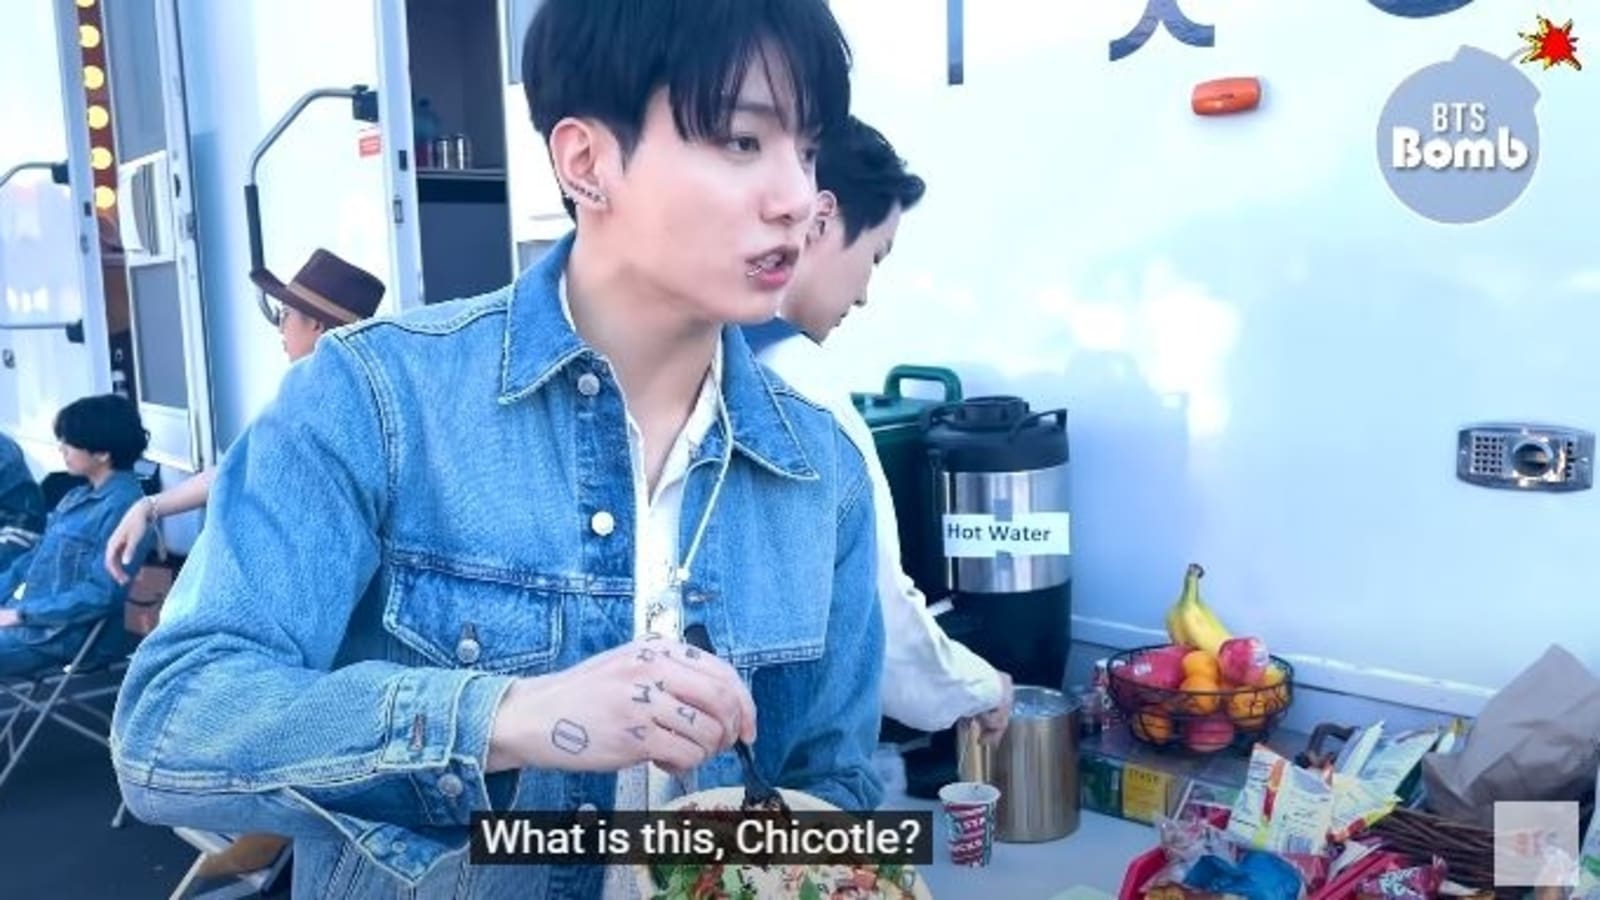 BTS's Jungkook pronounces Chipotle as Chicotle in viral video, brand  changes name on Twitter. Internet reacts - India Today